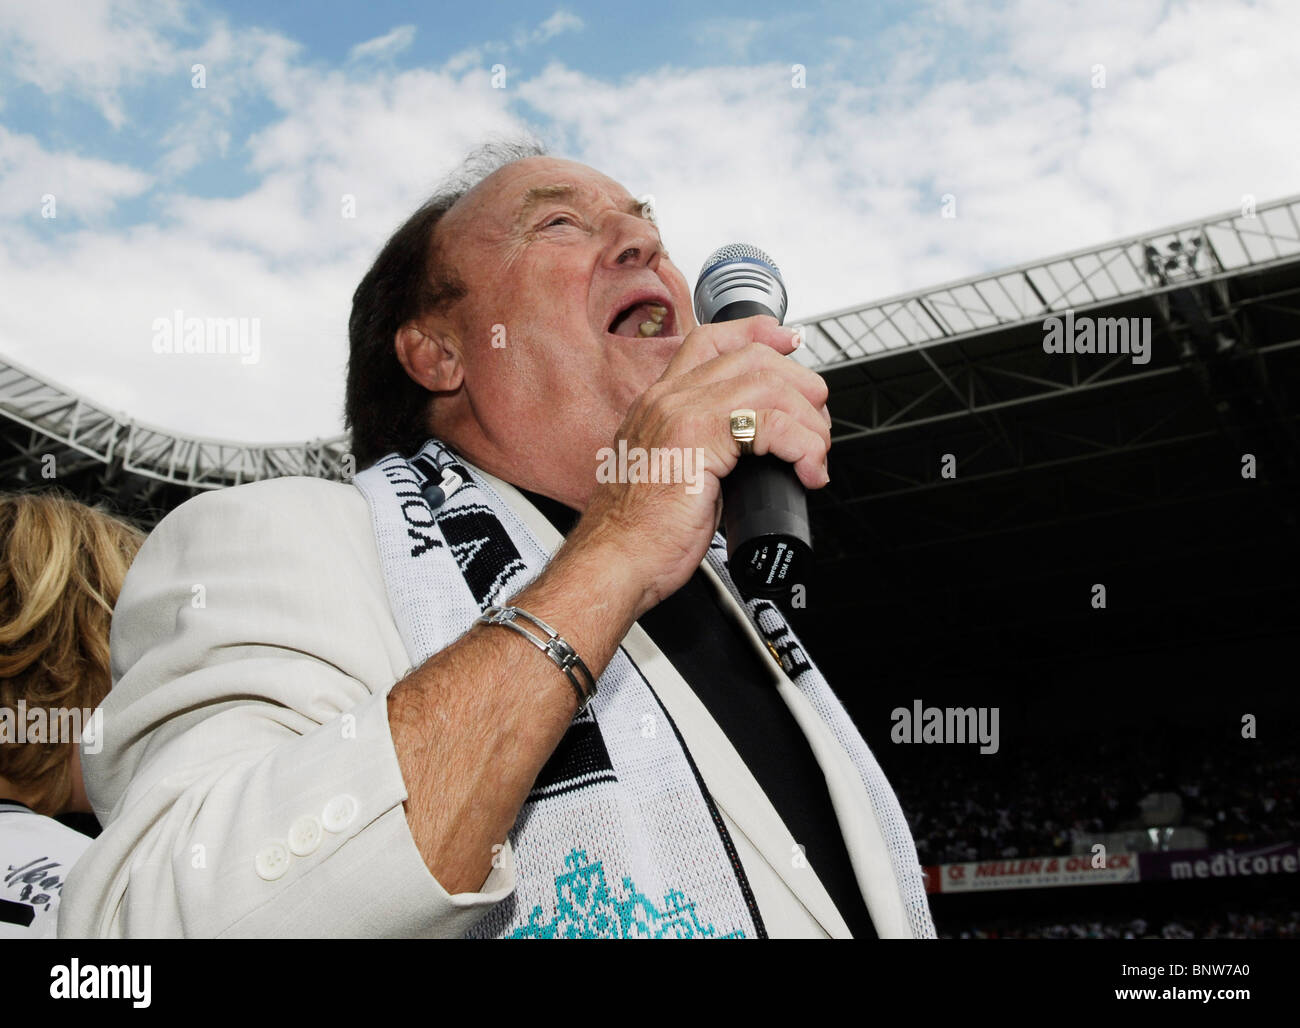 Borussia Park Moenchengladbach Germany, 01.08.2010, Football: Gerry MARSDEN, of  Gerry and the Pacemakers sings Liverpool FC Anthem 'You'll Never Walk Alone' before pre-season friendly match Moenchengladbach vs Liverpool Stock Photo